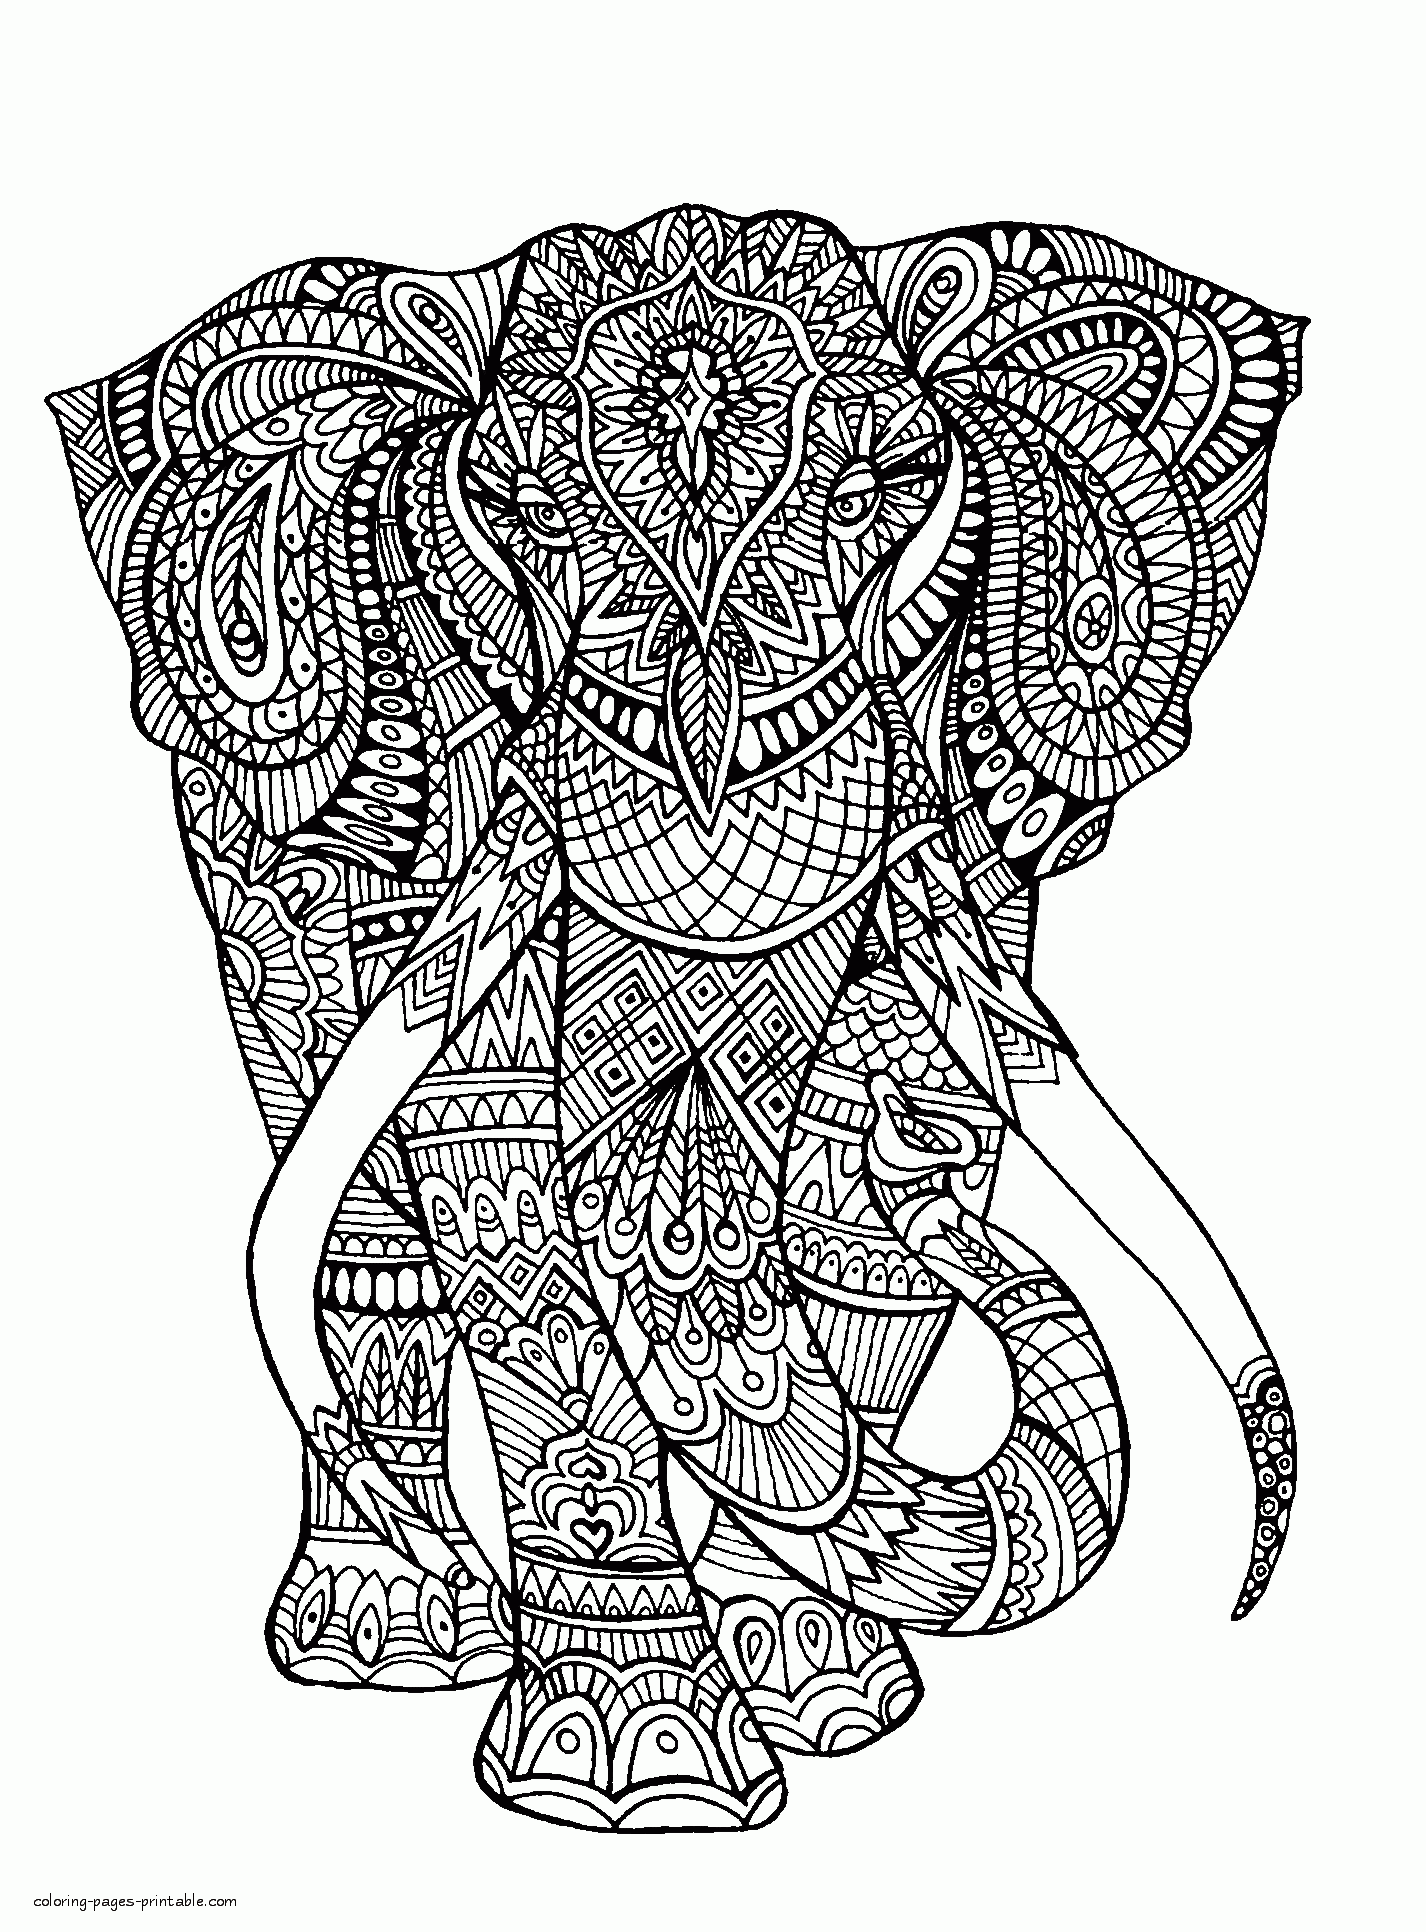 Difficult Elephant Colouring Page || COLORING-PAGES-PRINTABLE.COM